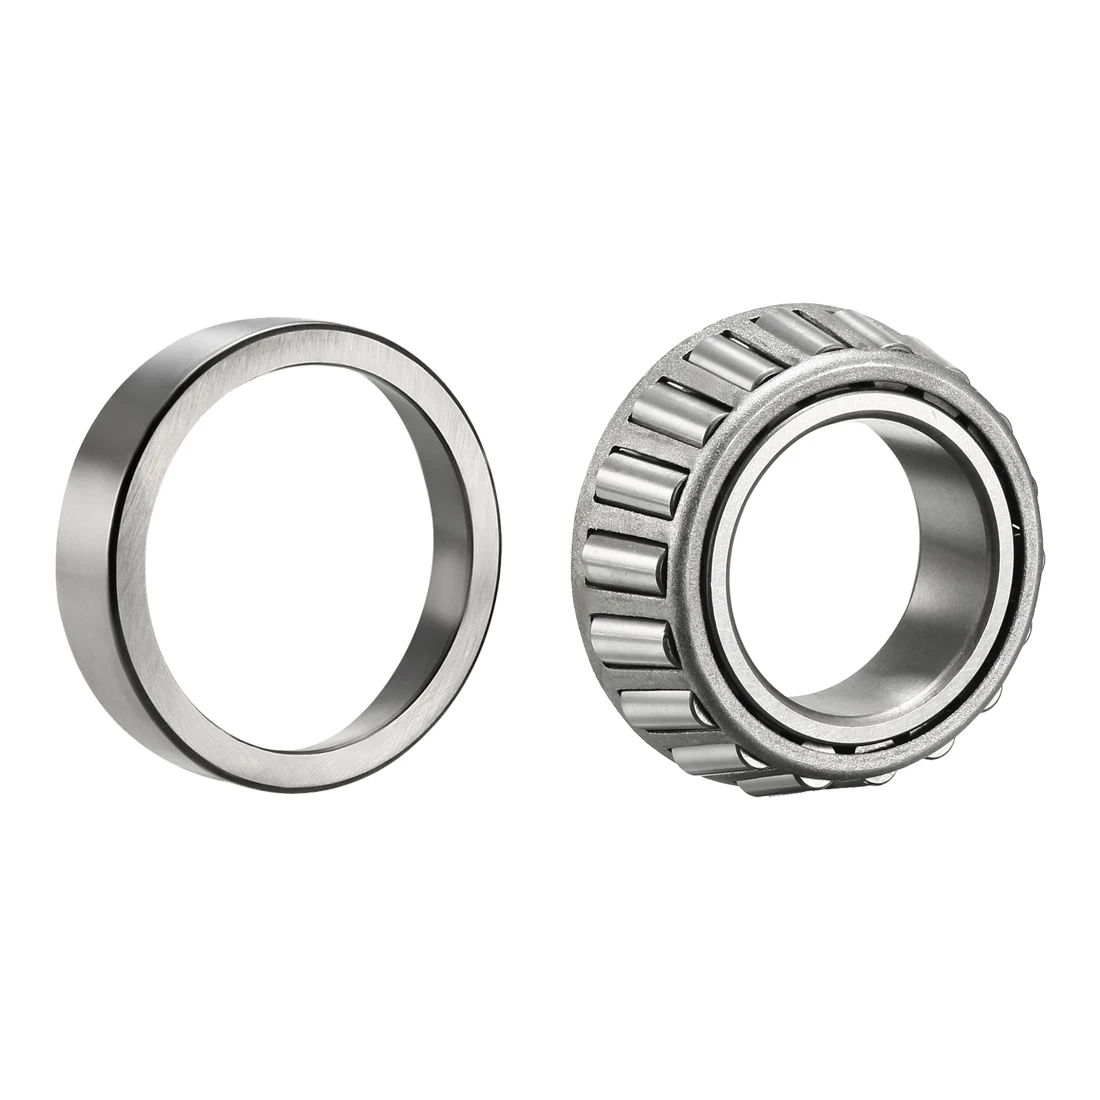 

uxcell 1 Piece 3780 Tapered Roller Bearing Single Cone 2 inch Bore 1.193 inch Width Steel for Home Office DIY